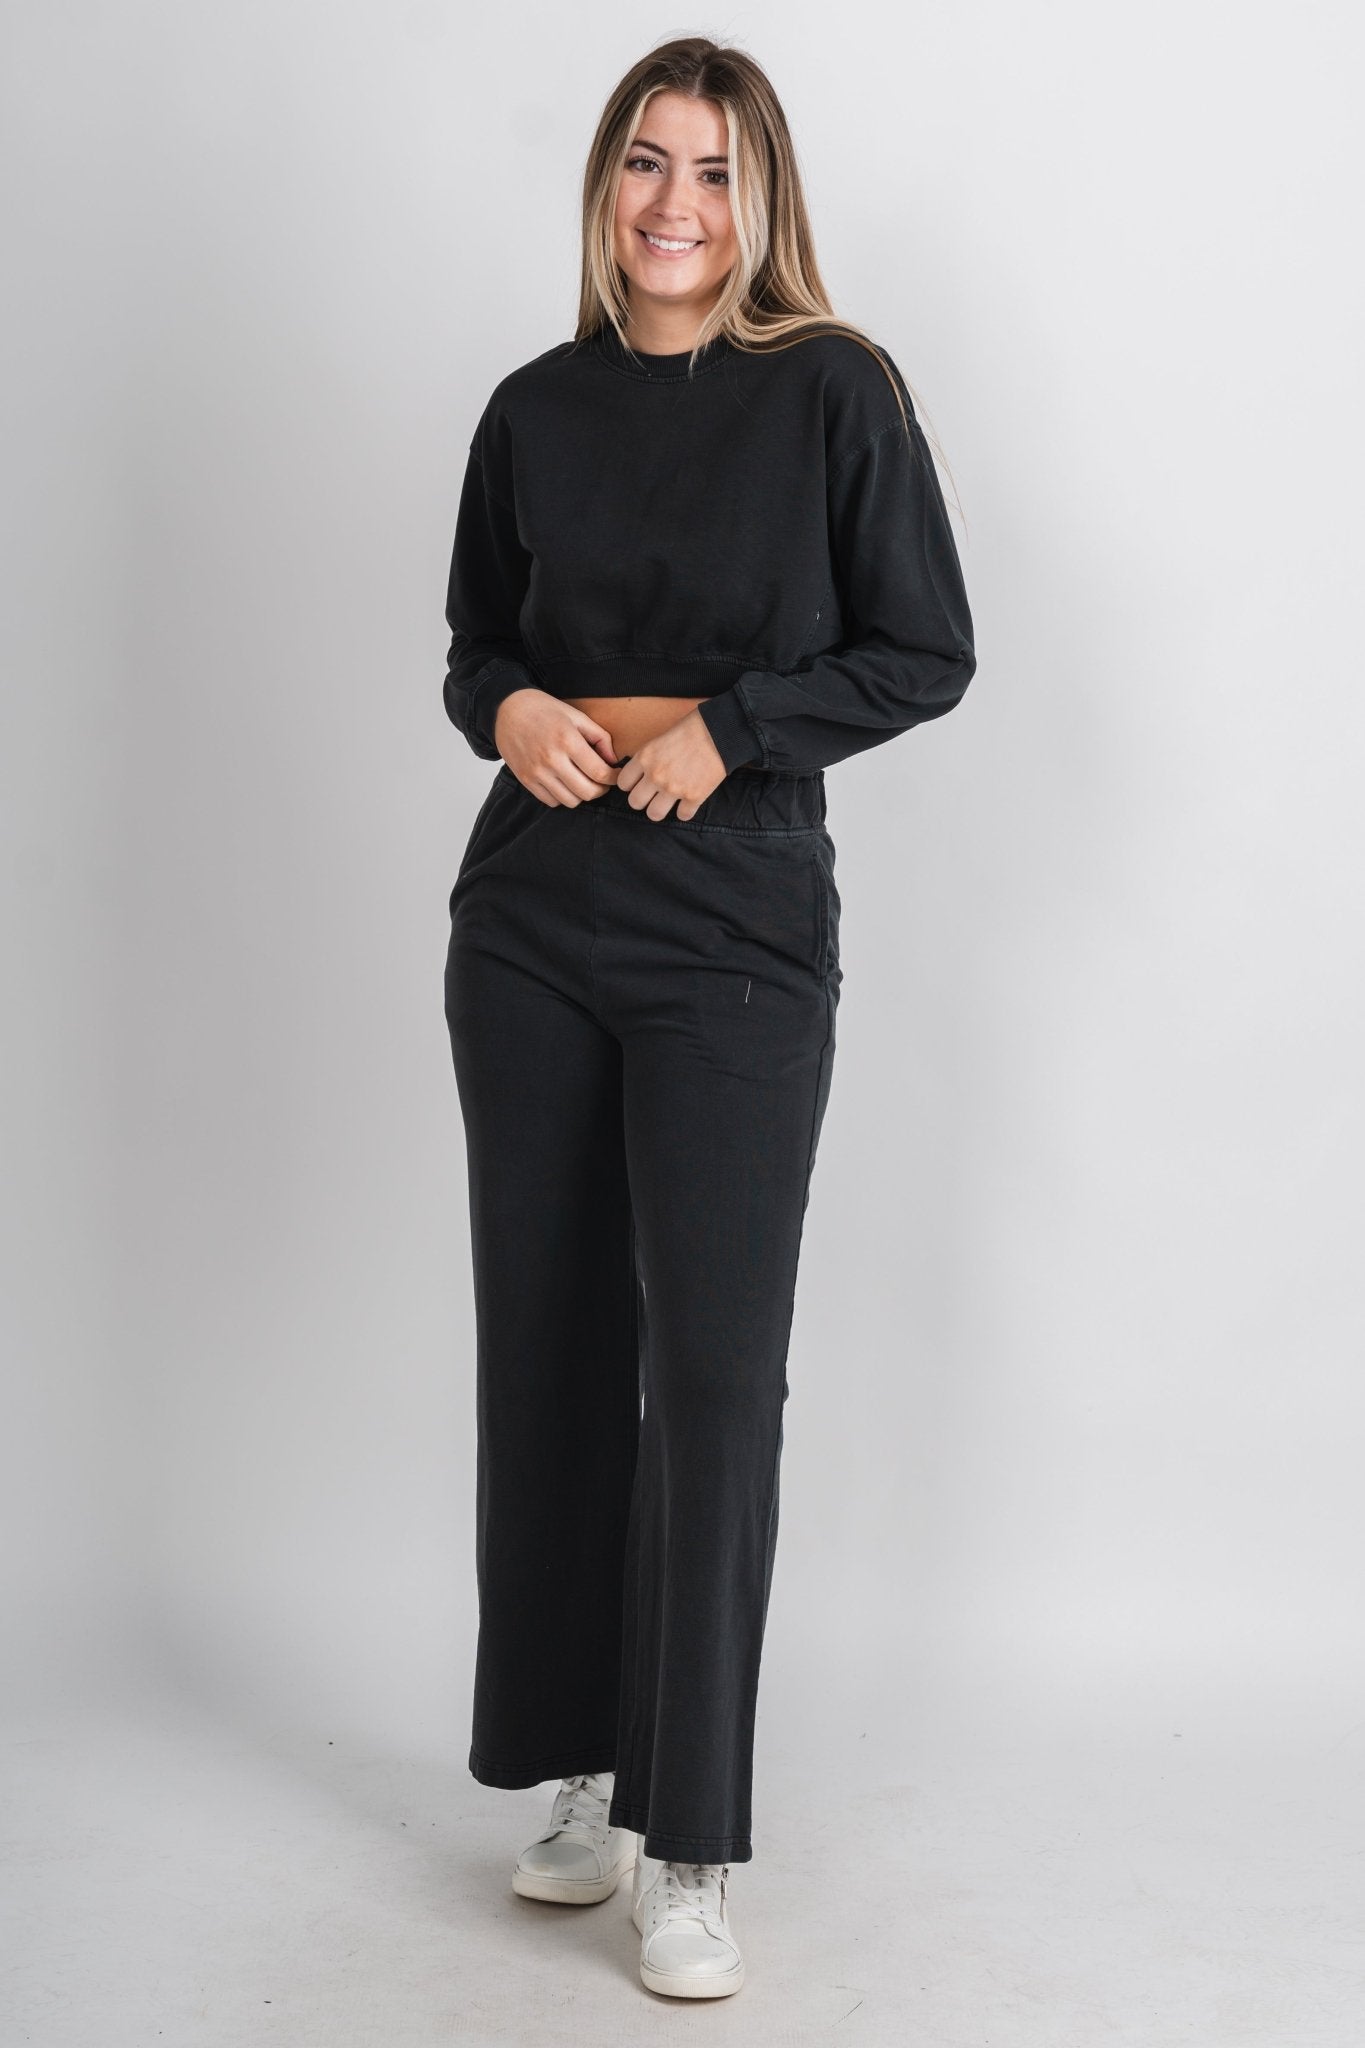 New Arrivals | Lush Fashion Lounge: The Latest Women's Apparel in OKC ...